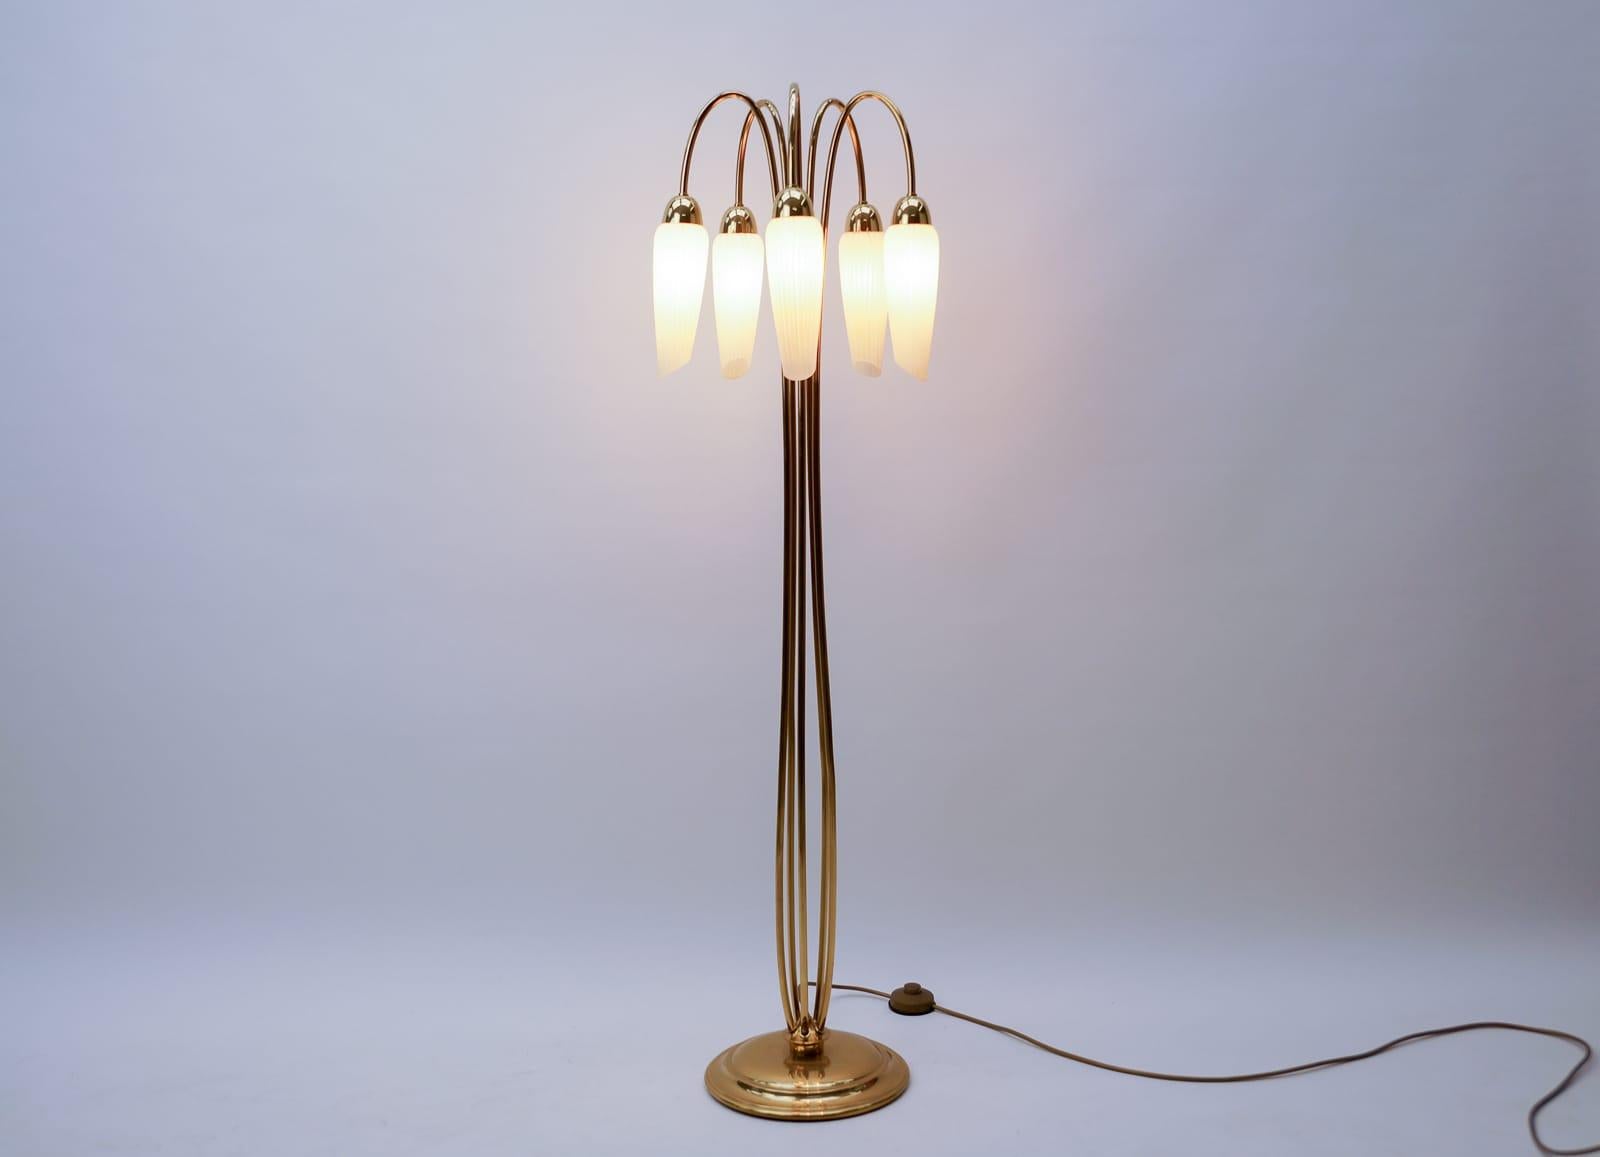 Very rare Mid-Century Modern floor lamp with five glass shades, 1950s Italy

Fully functional.

Five E14 sockets. Works with 220V and 110V.

Wiring is suitable for all countries.